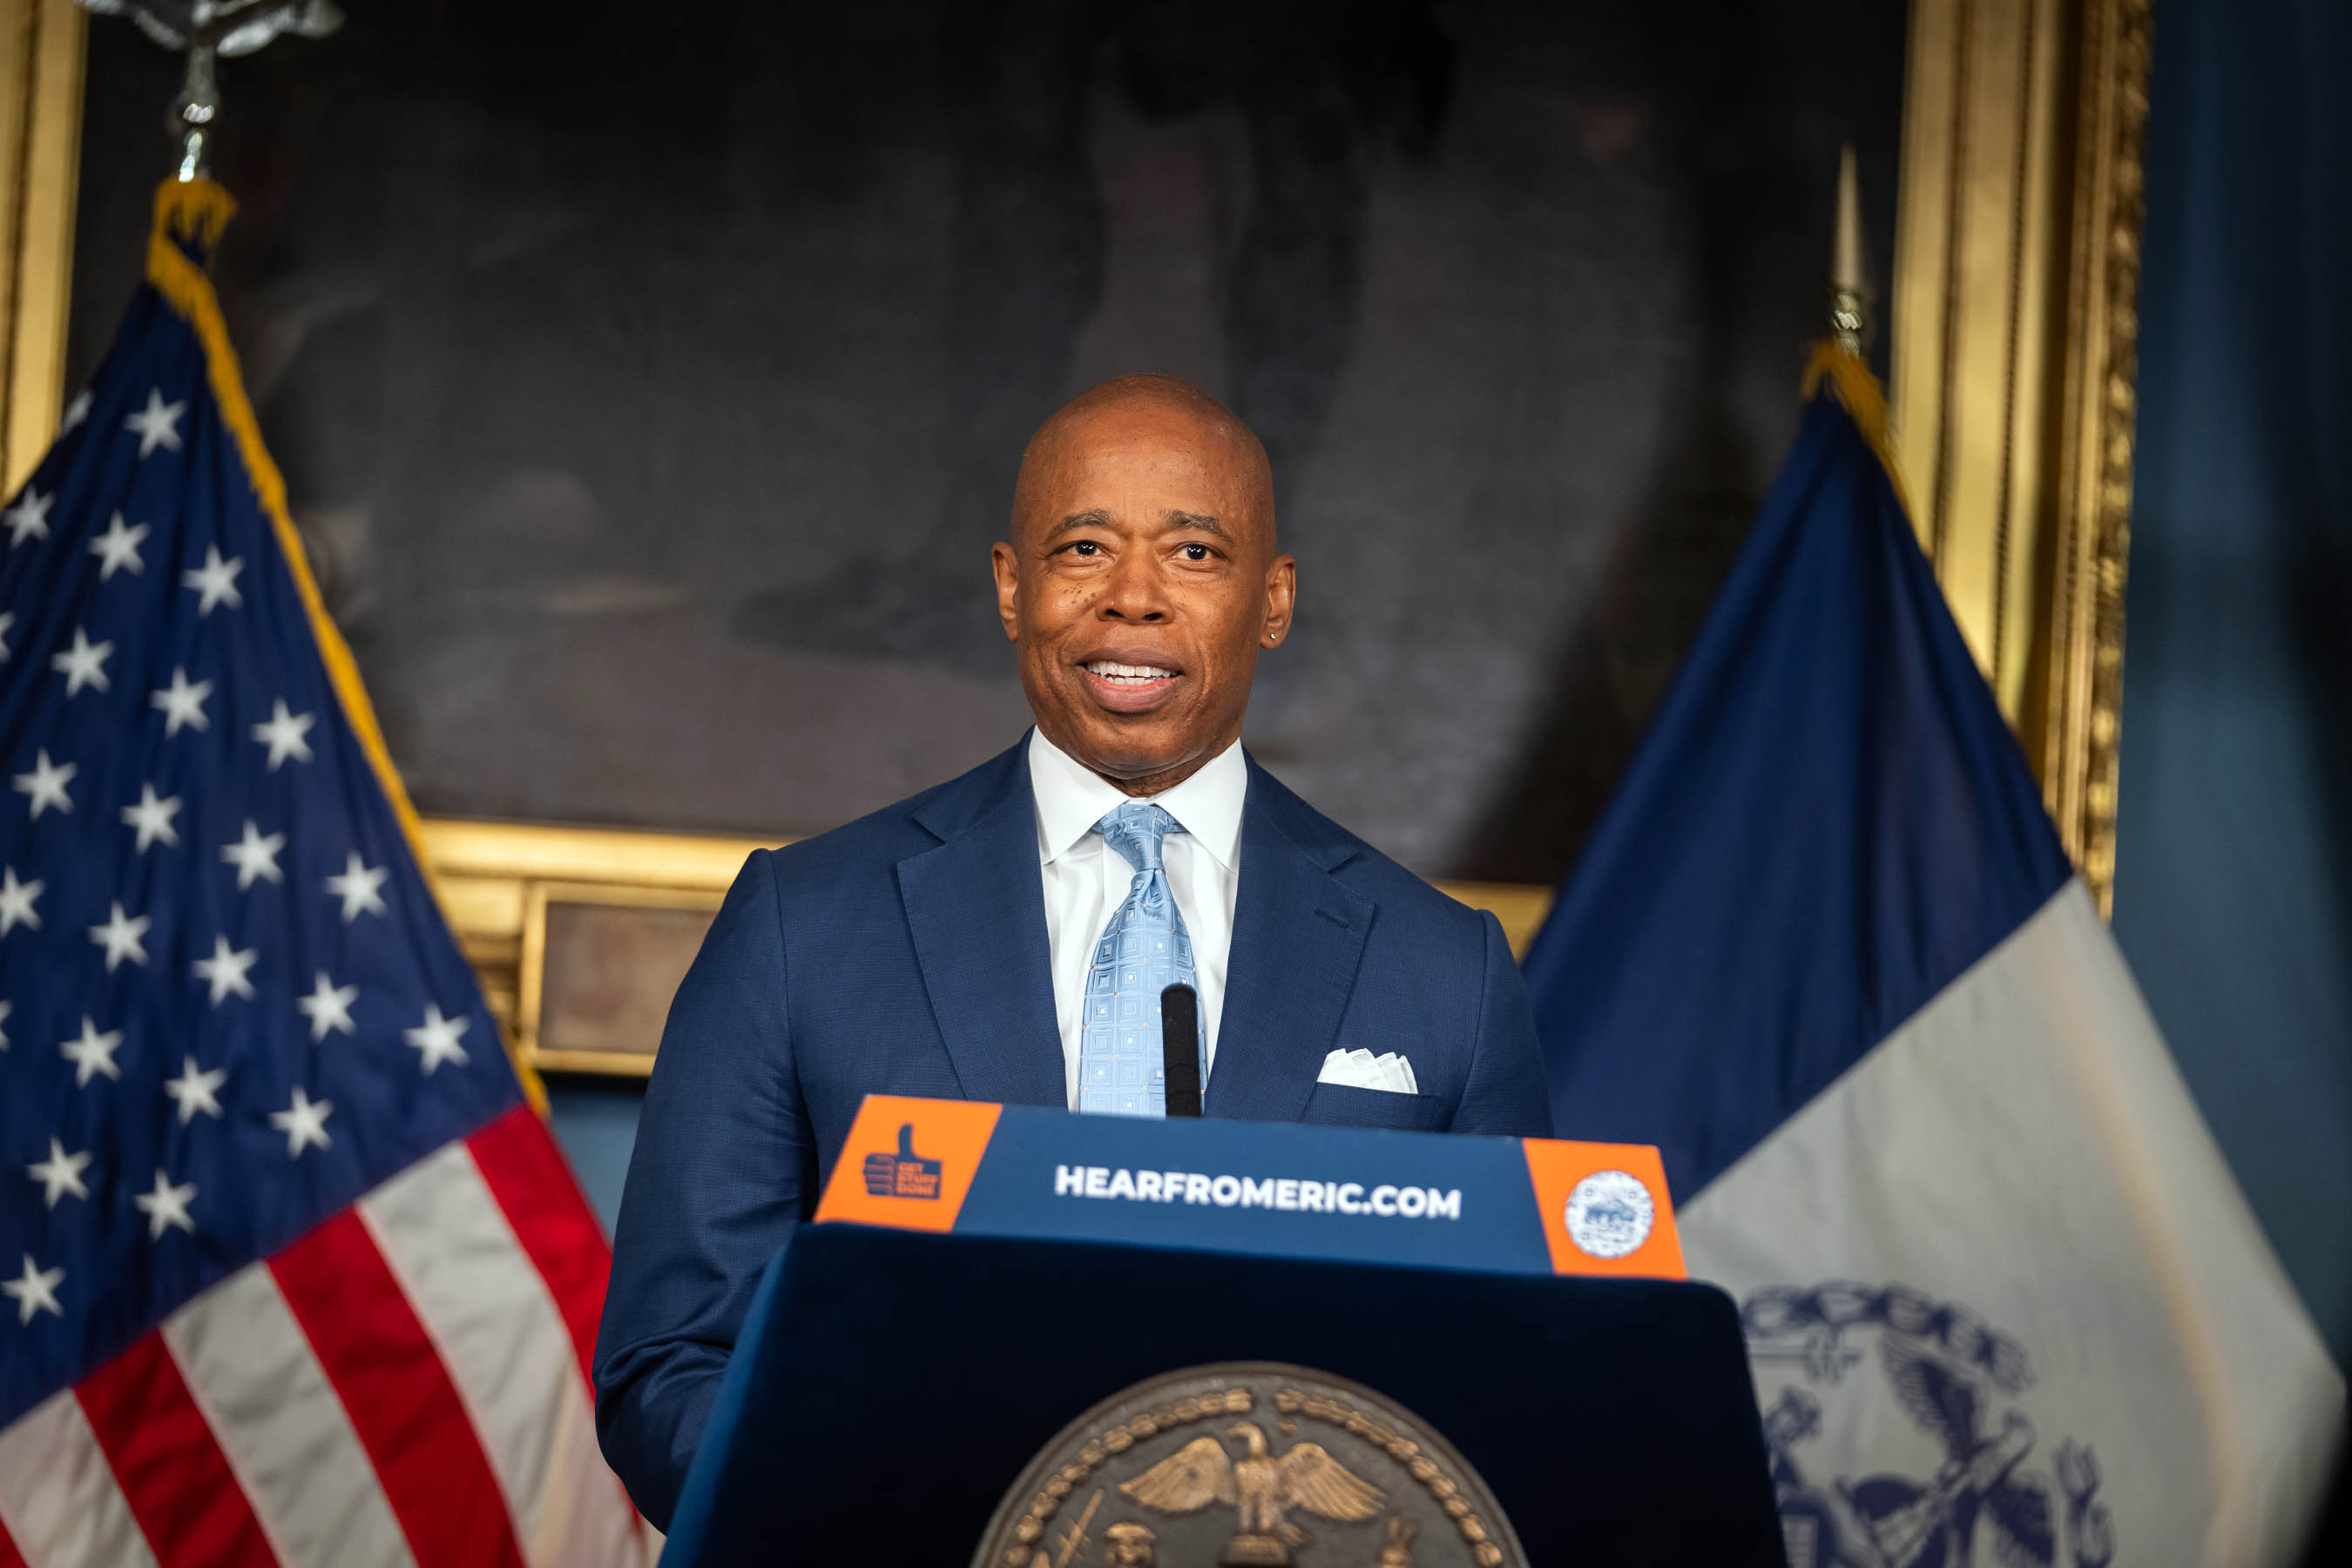 LIVE ON 1010 WINS: Mayor Adams talks budget plans, NYPD presence, college protests, and more